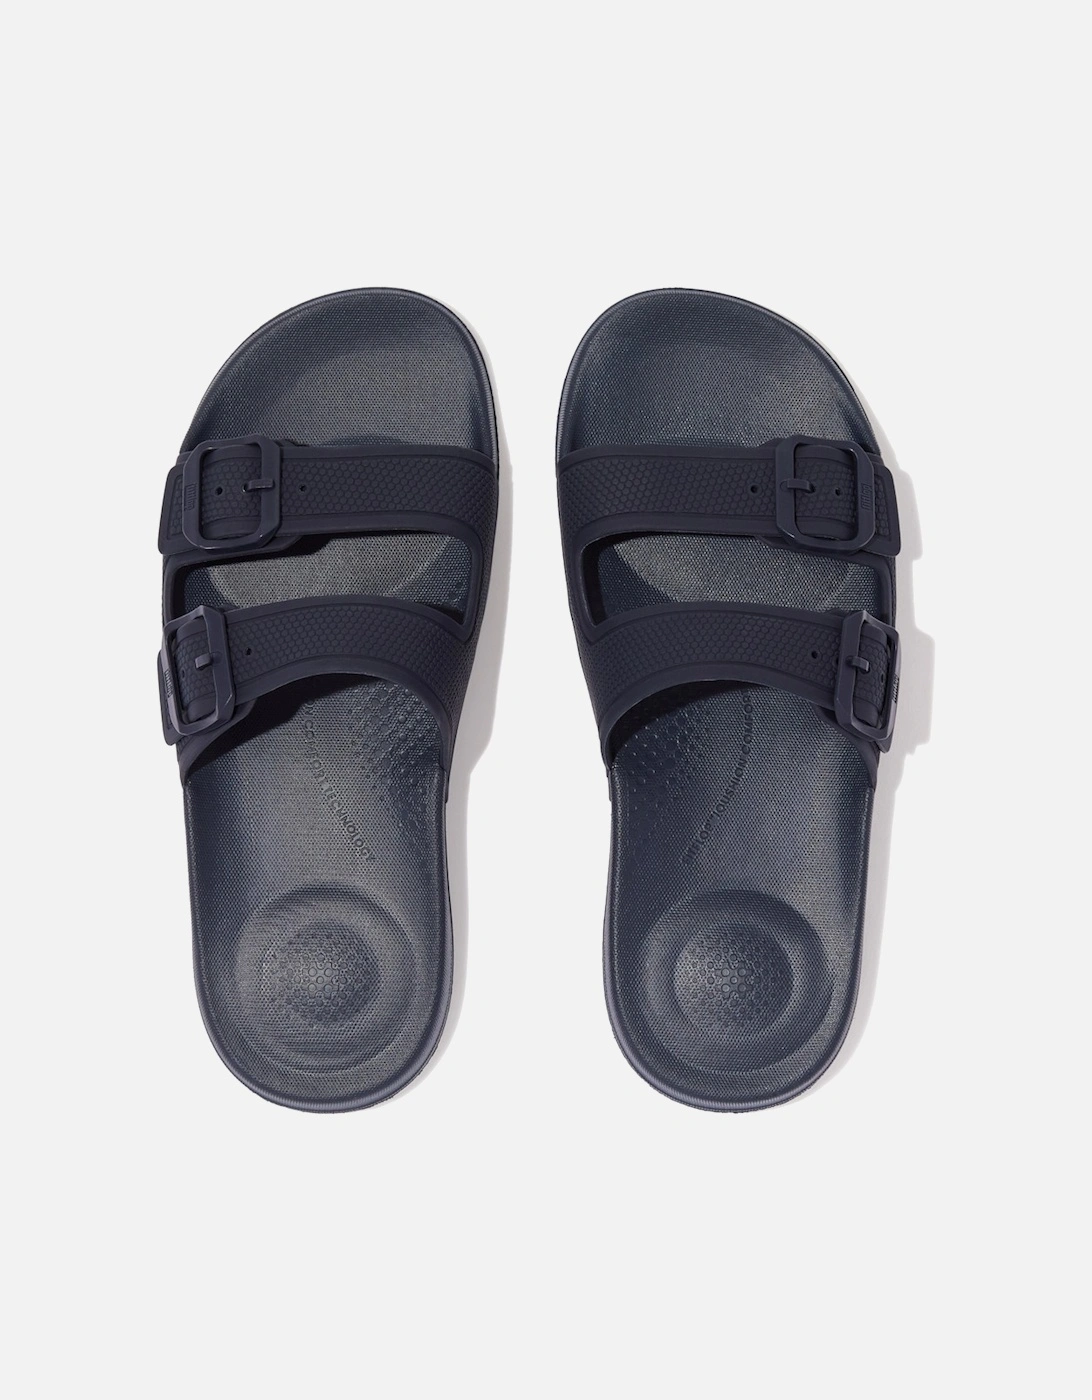 Womens iQUSHION Adjustable Buckle Sliders